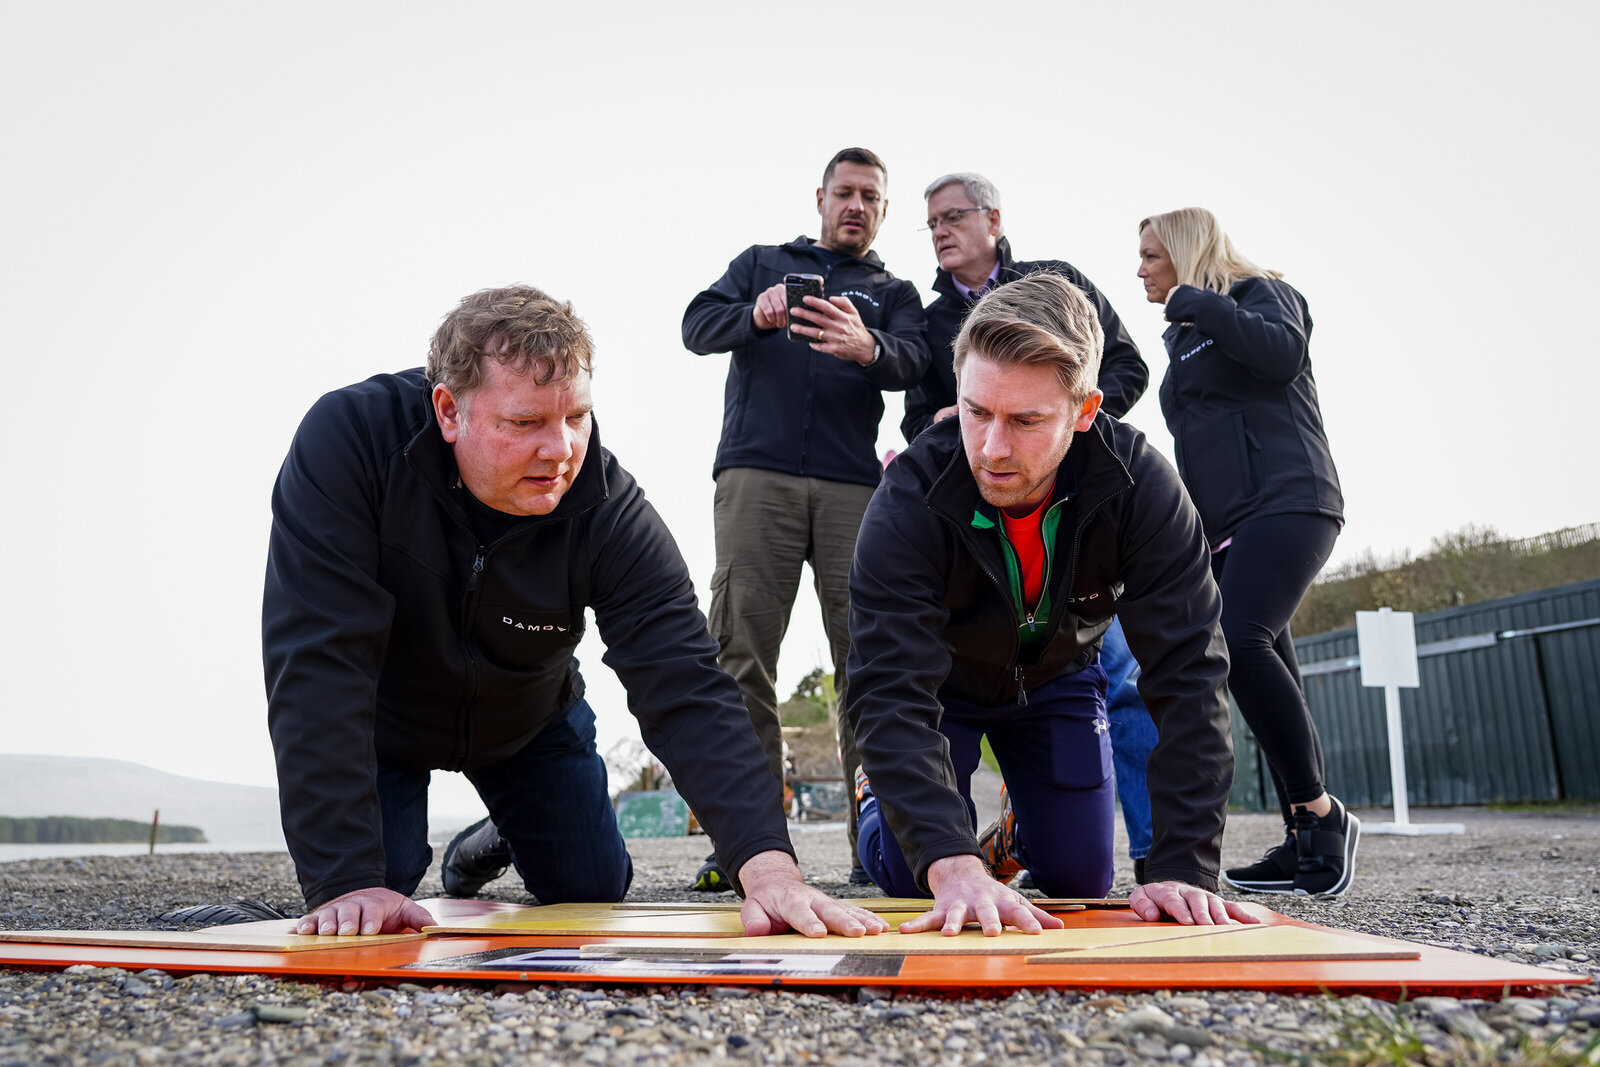  Team building corporate event photography Dublin Wicklow Ireland by photographer Roger Kenny 